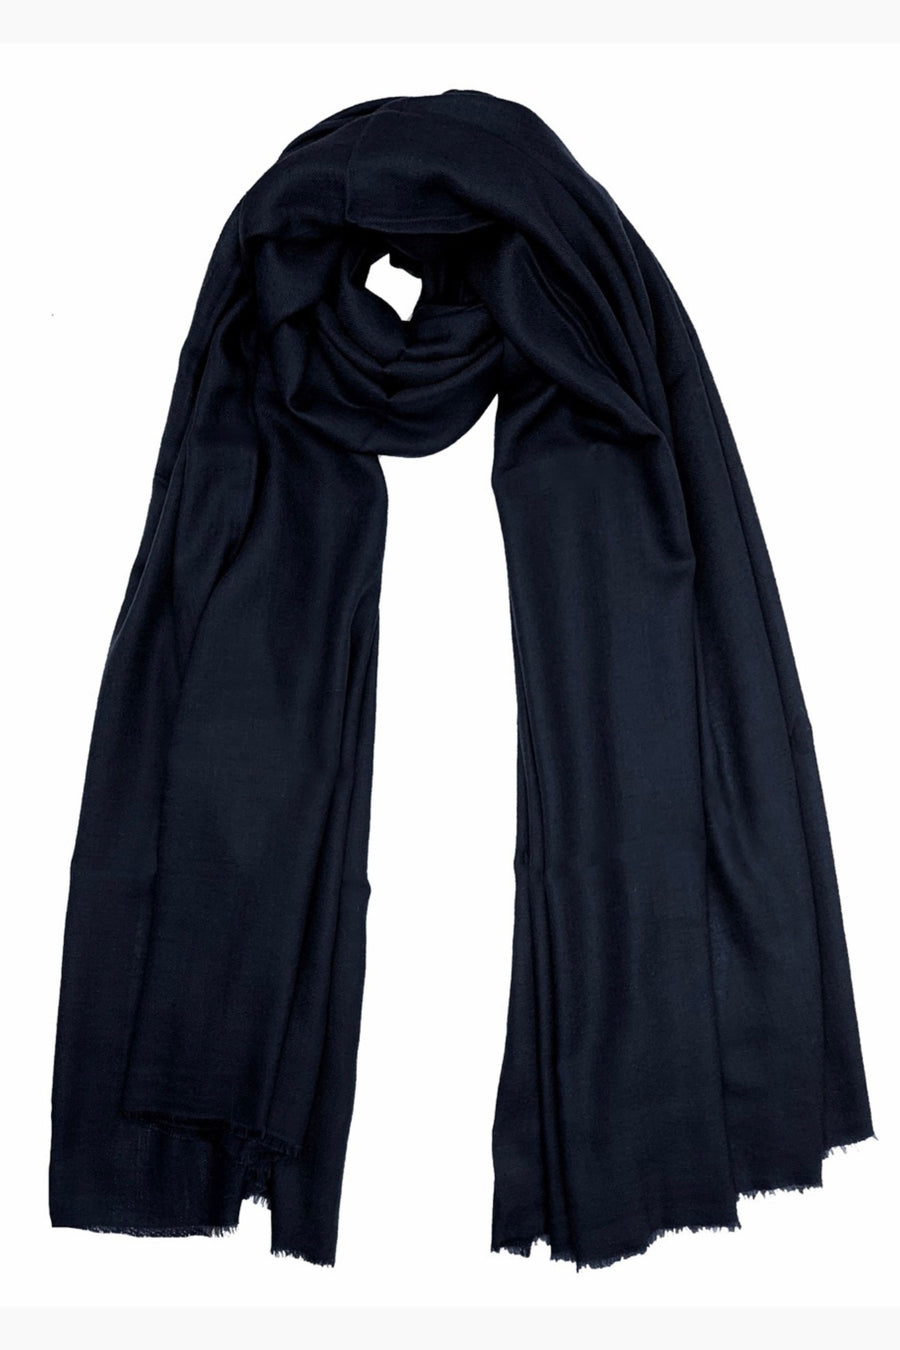 THE LARGE HANDWOVEN CASHMERE SCARF | Navy Blue